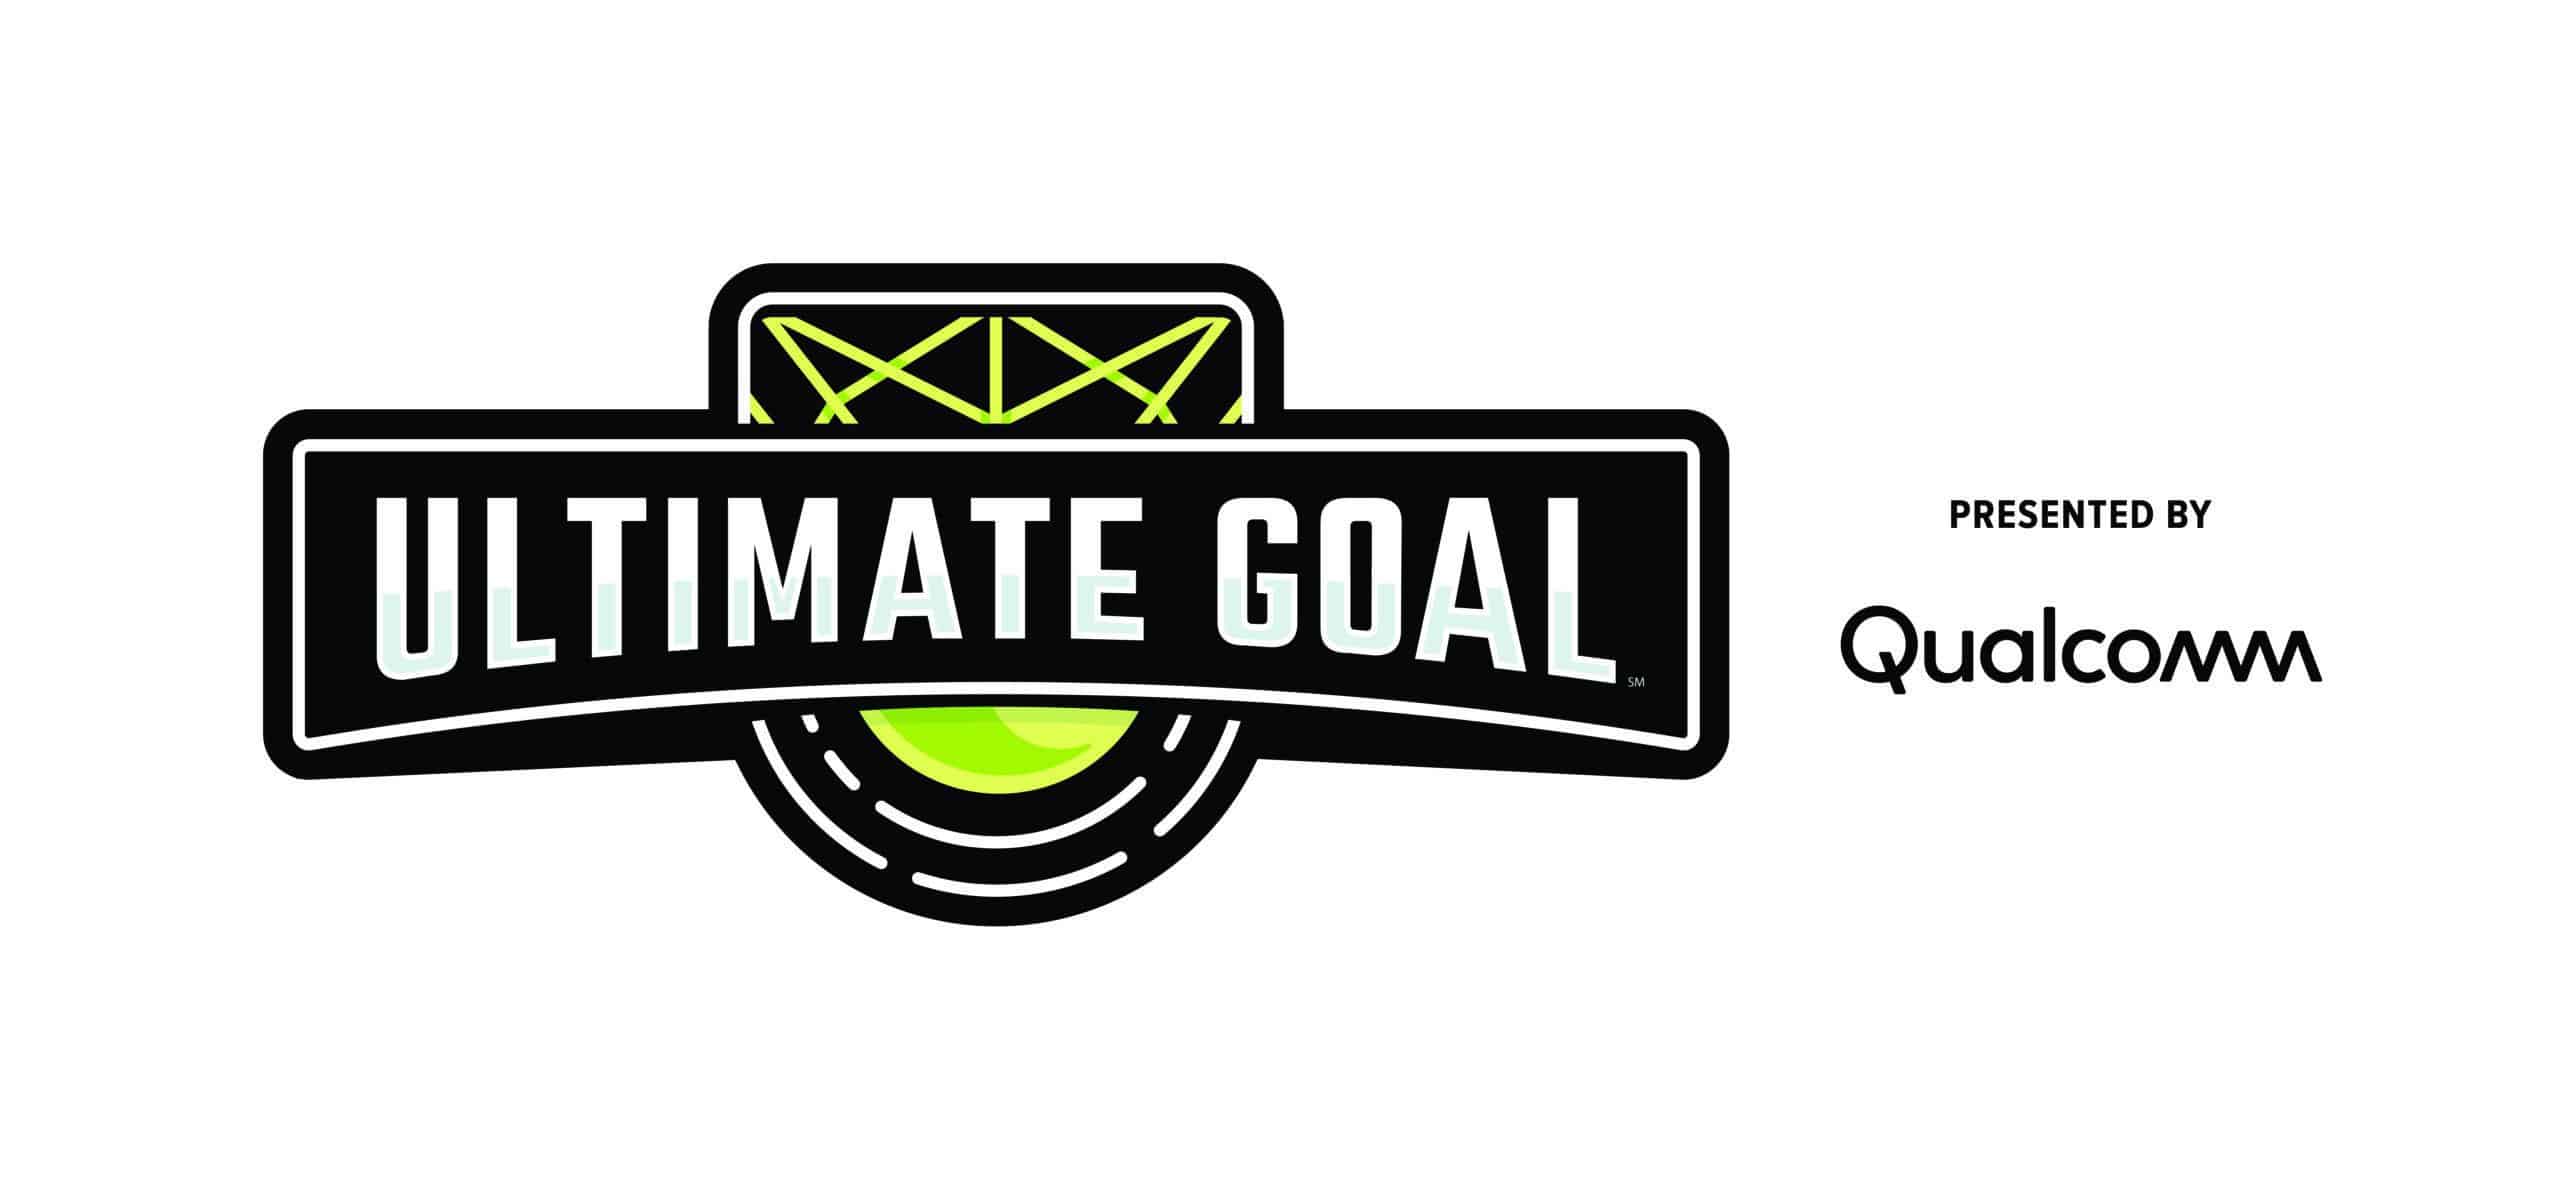 ULTIMATE GOAL FIRST Tech Challenge logo